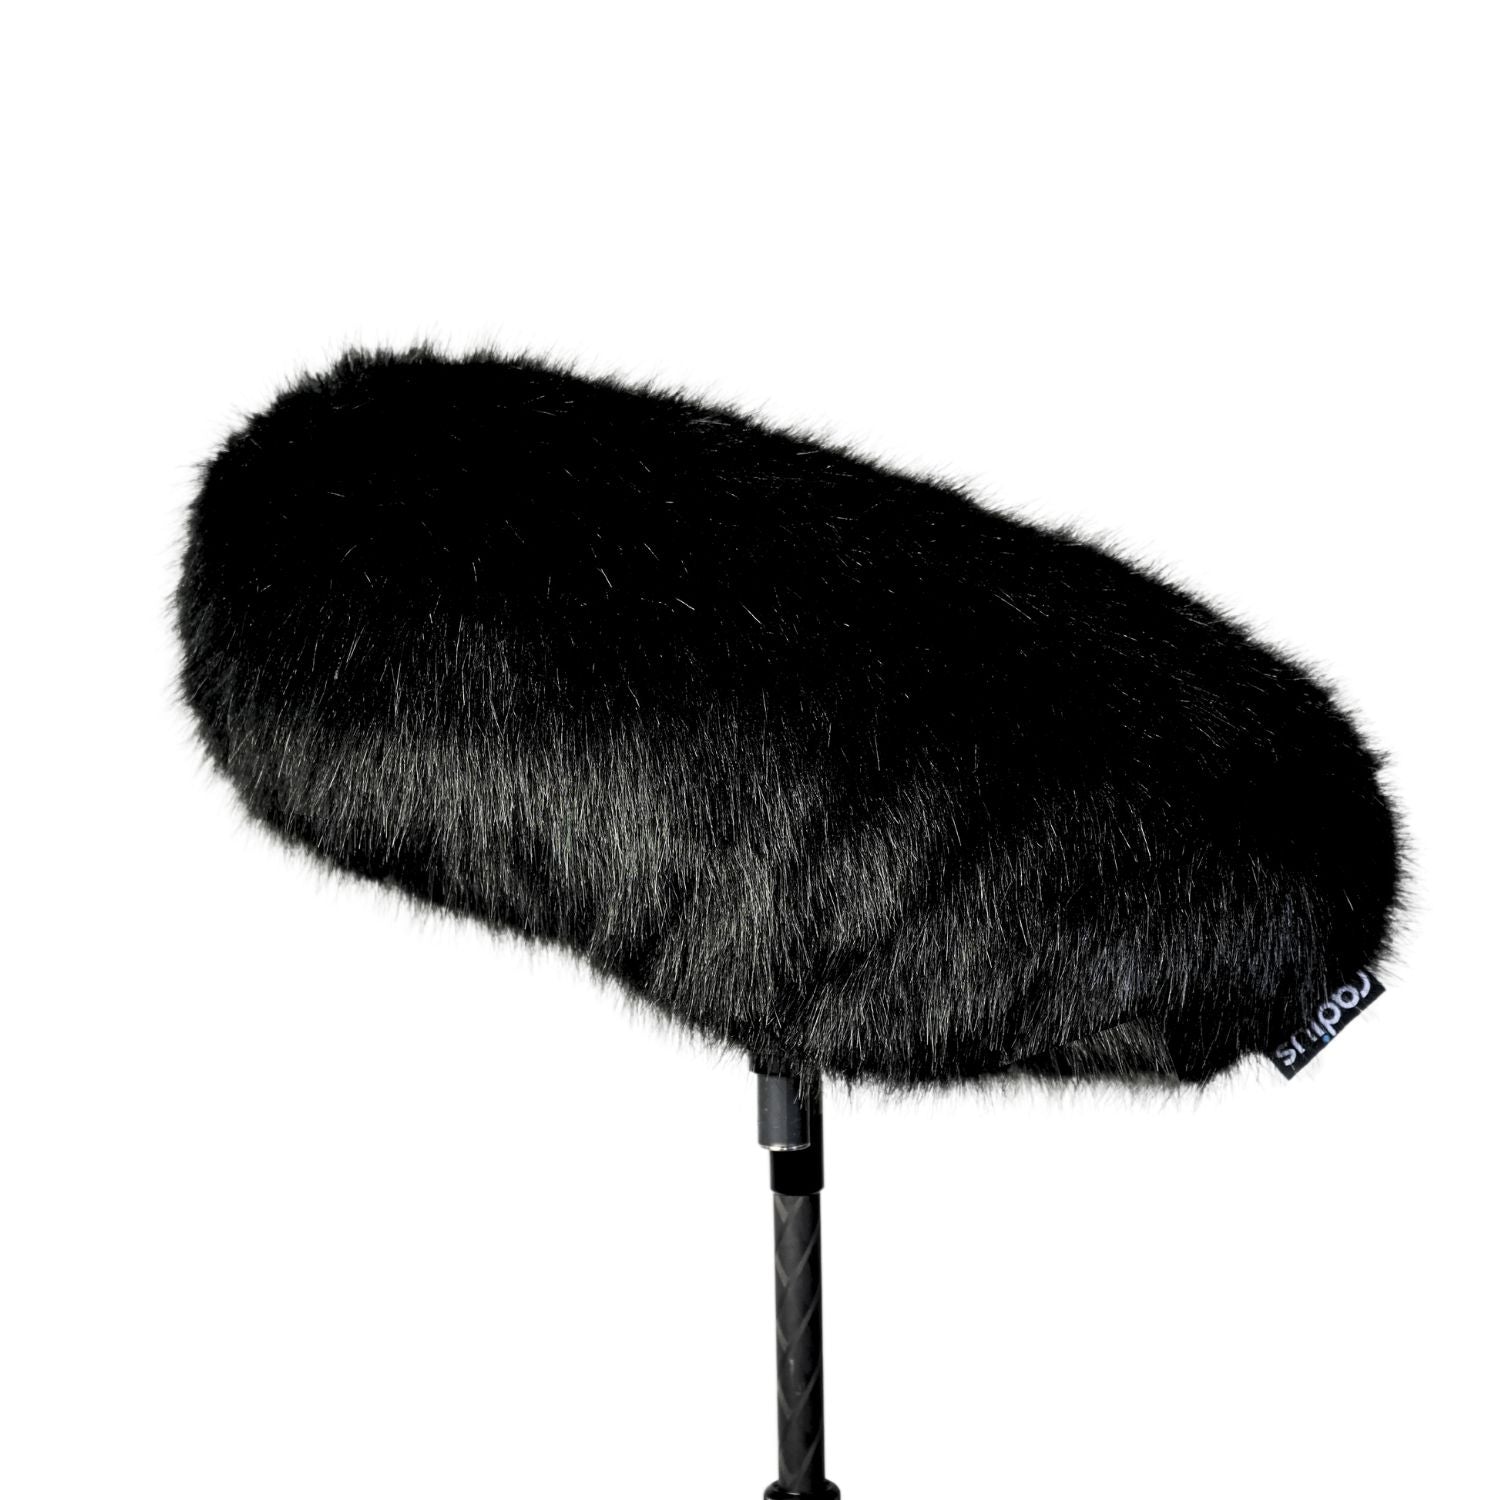 Replacement Windcover for Cinela Piano, Black Fur